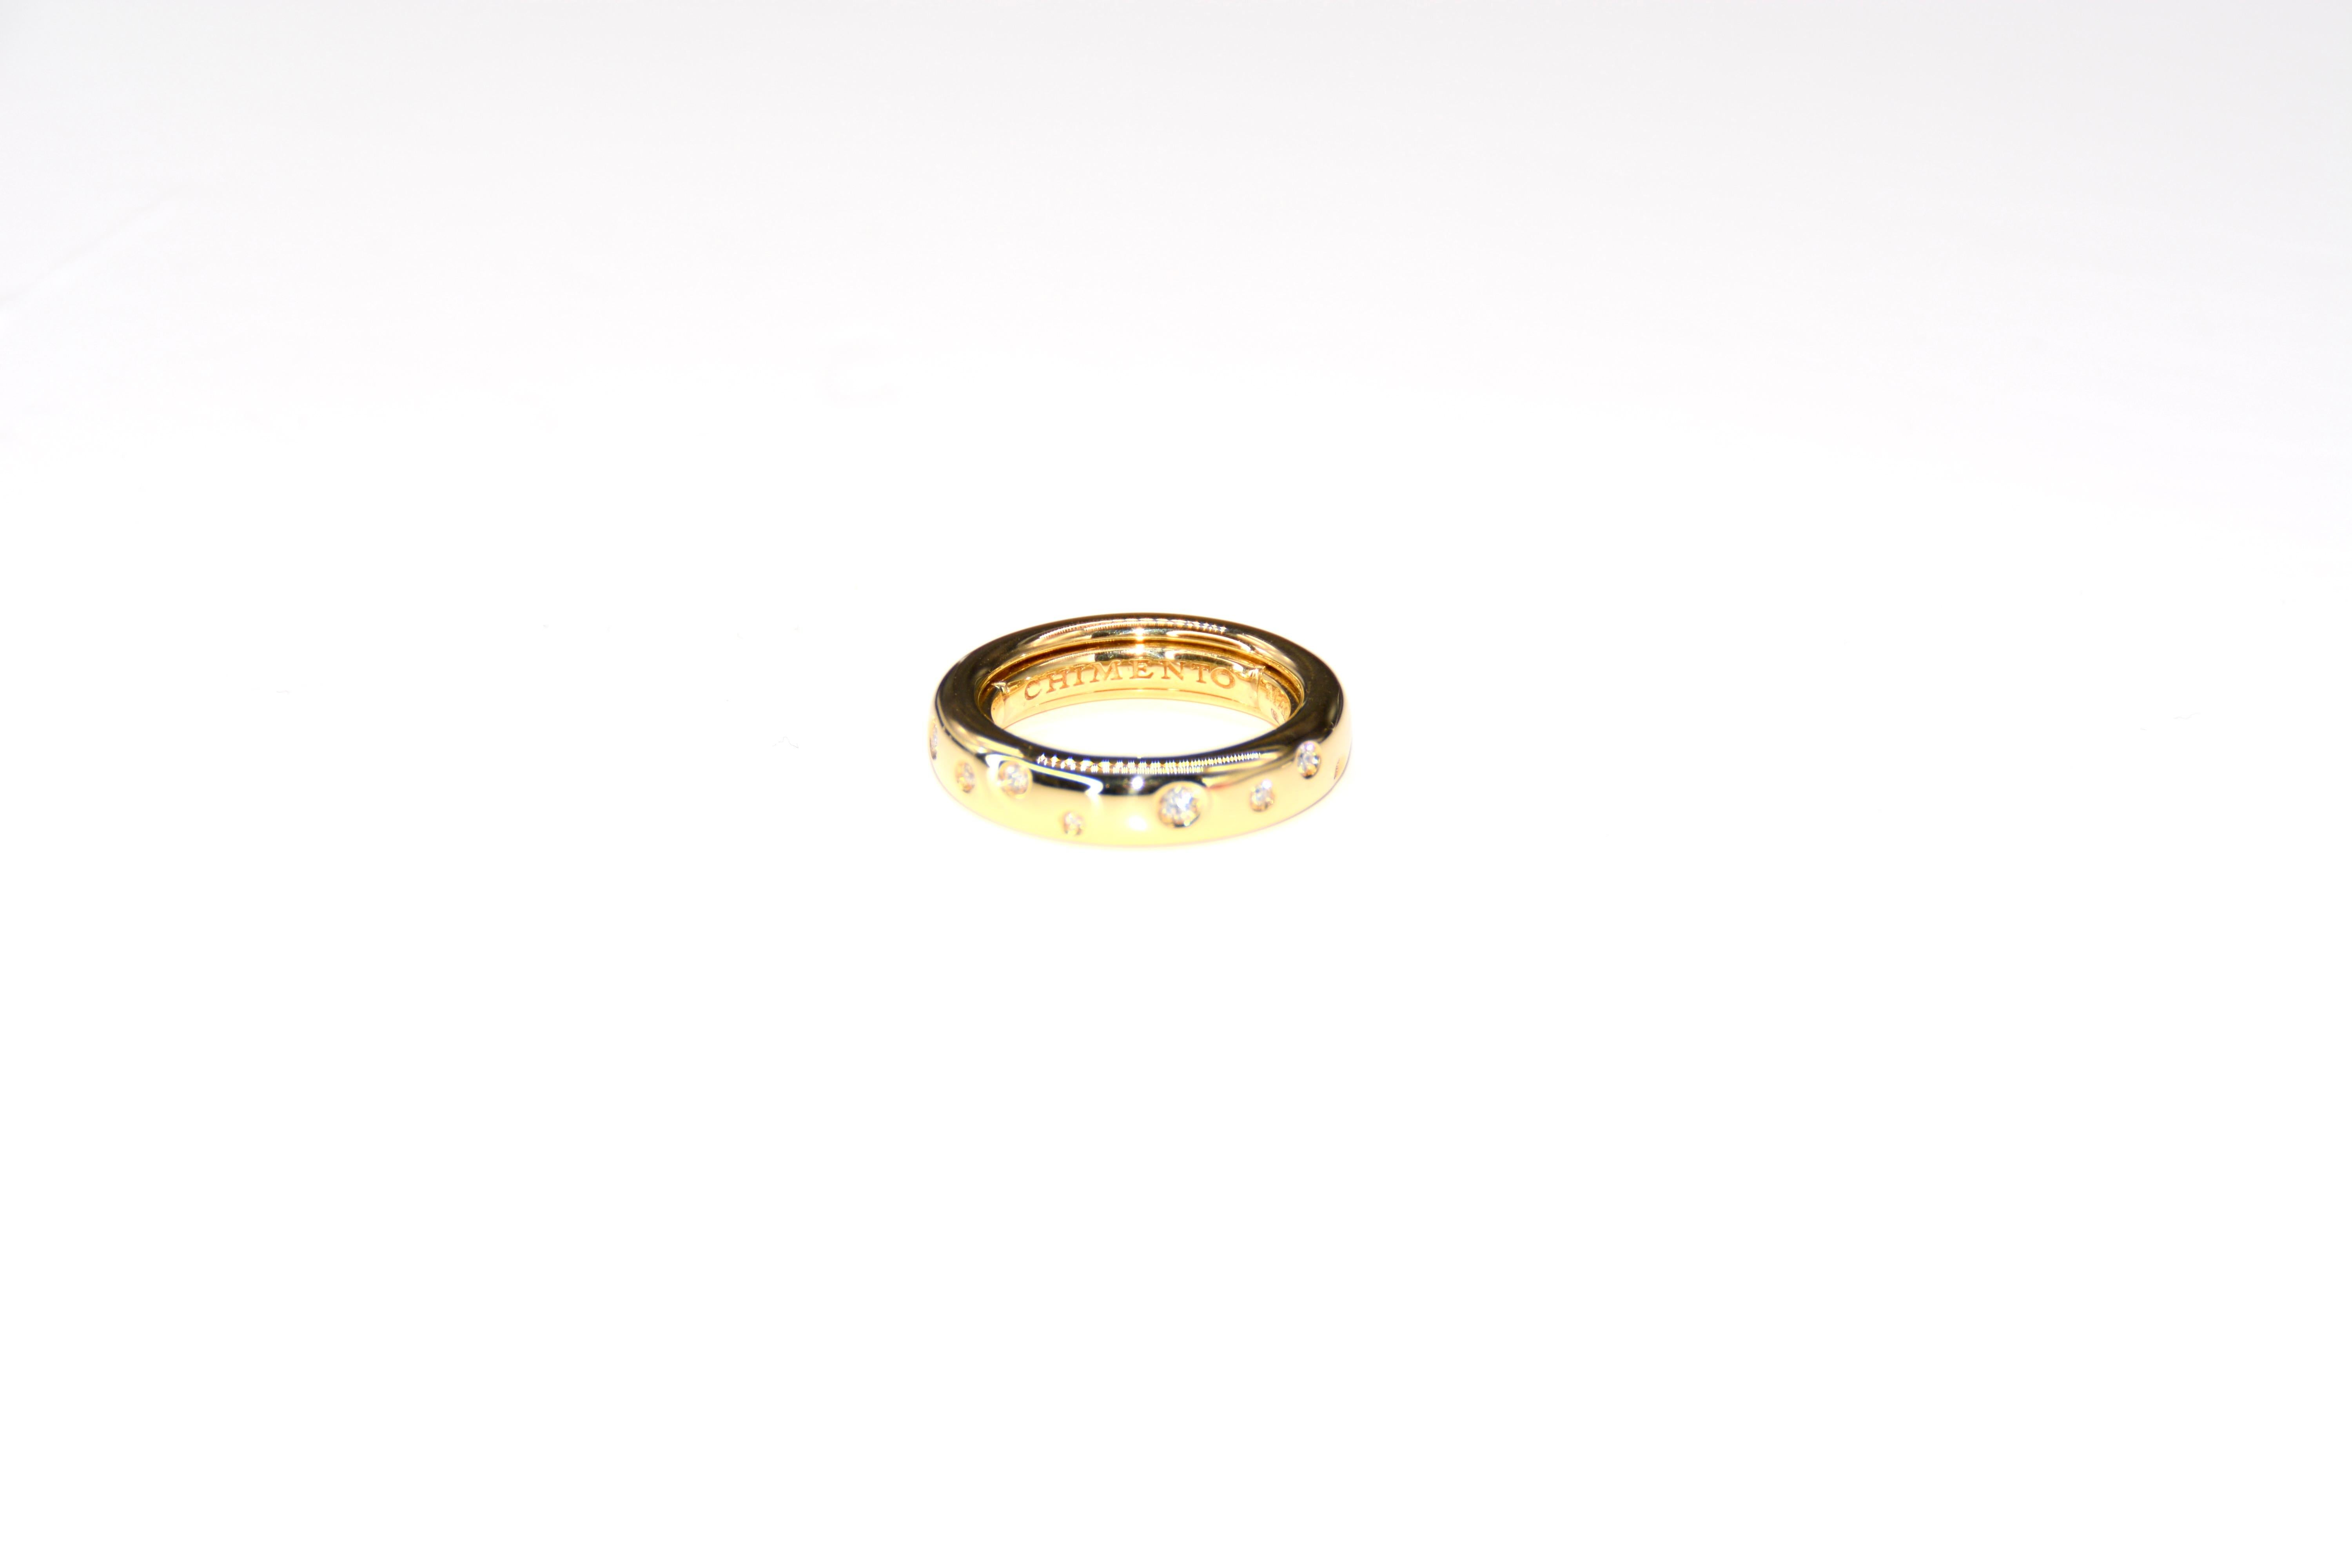 Chimento Forever Brio Ring Adjustable Diamond Yellow Gold

Discover the Chimento Forever Brio ring in 18K yellow gold, an elegant and timeless engagement ring. With a total weight of 4.70 grams, this ring has an adjustment system inside the band to